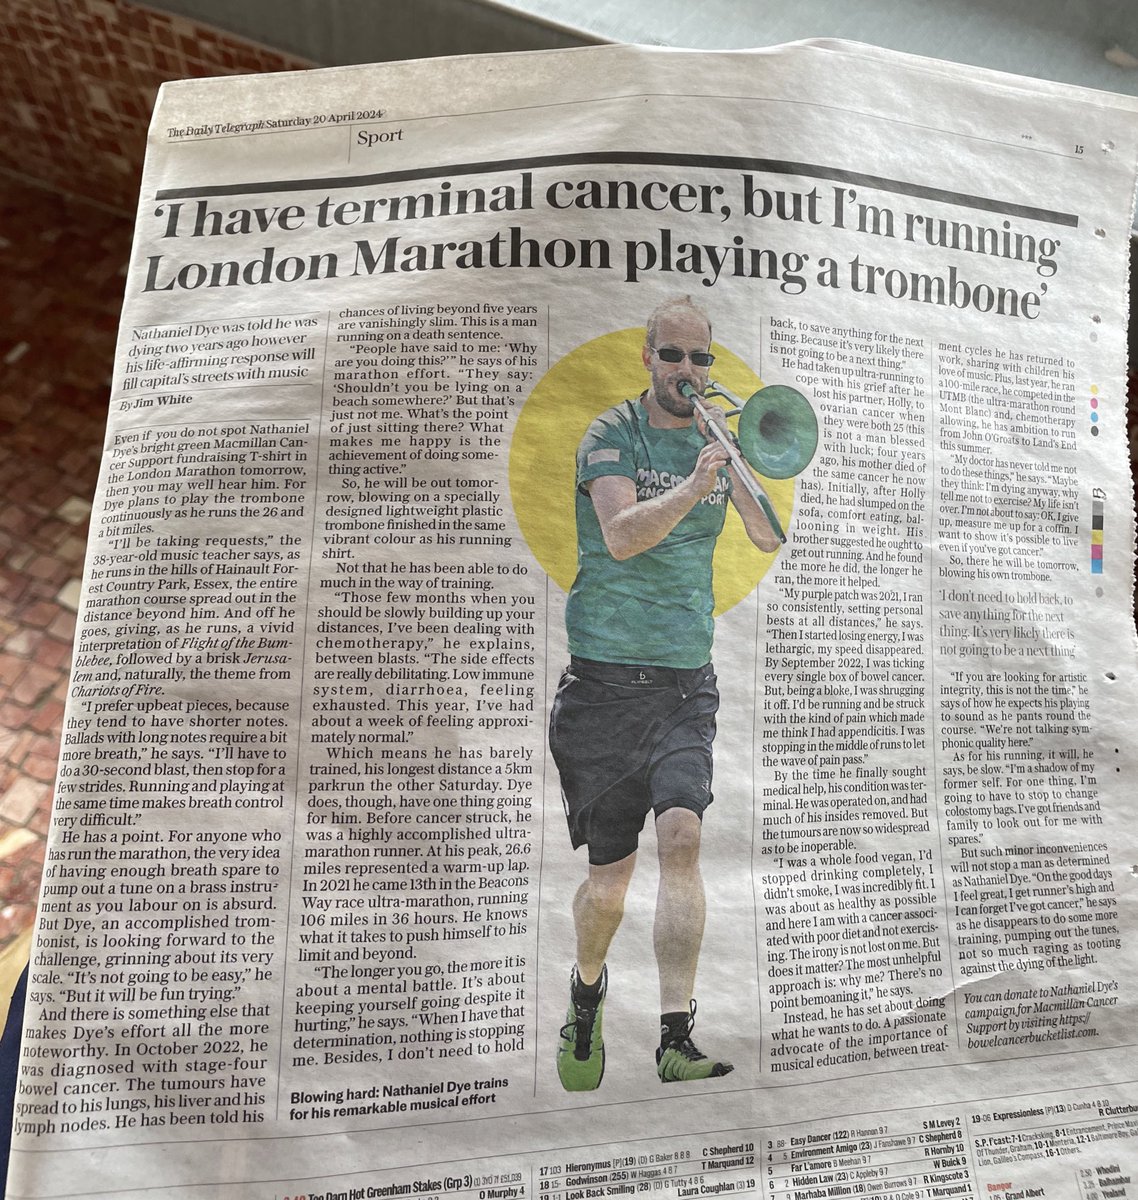 Very moving story this, incredible really. Nathaniel Dye is running the marathon while playing the trombone. With stage IV cancer… @macmillancancer @LondonMarathon